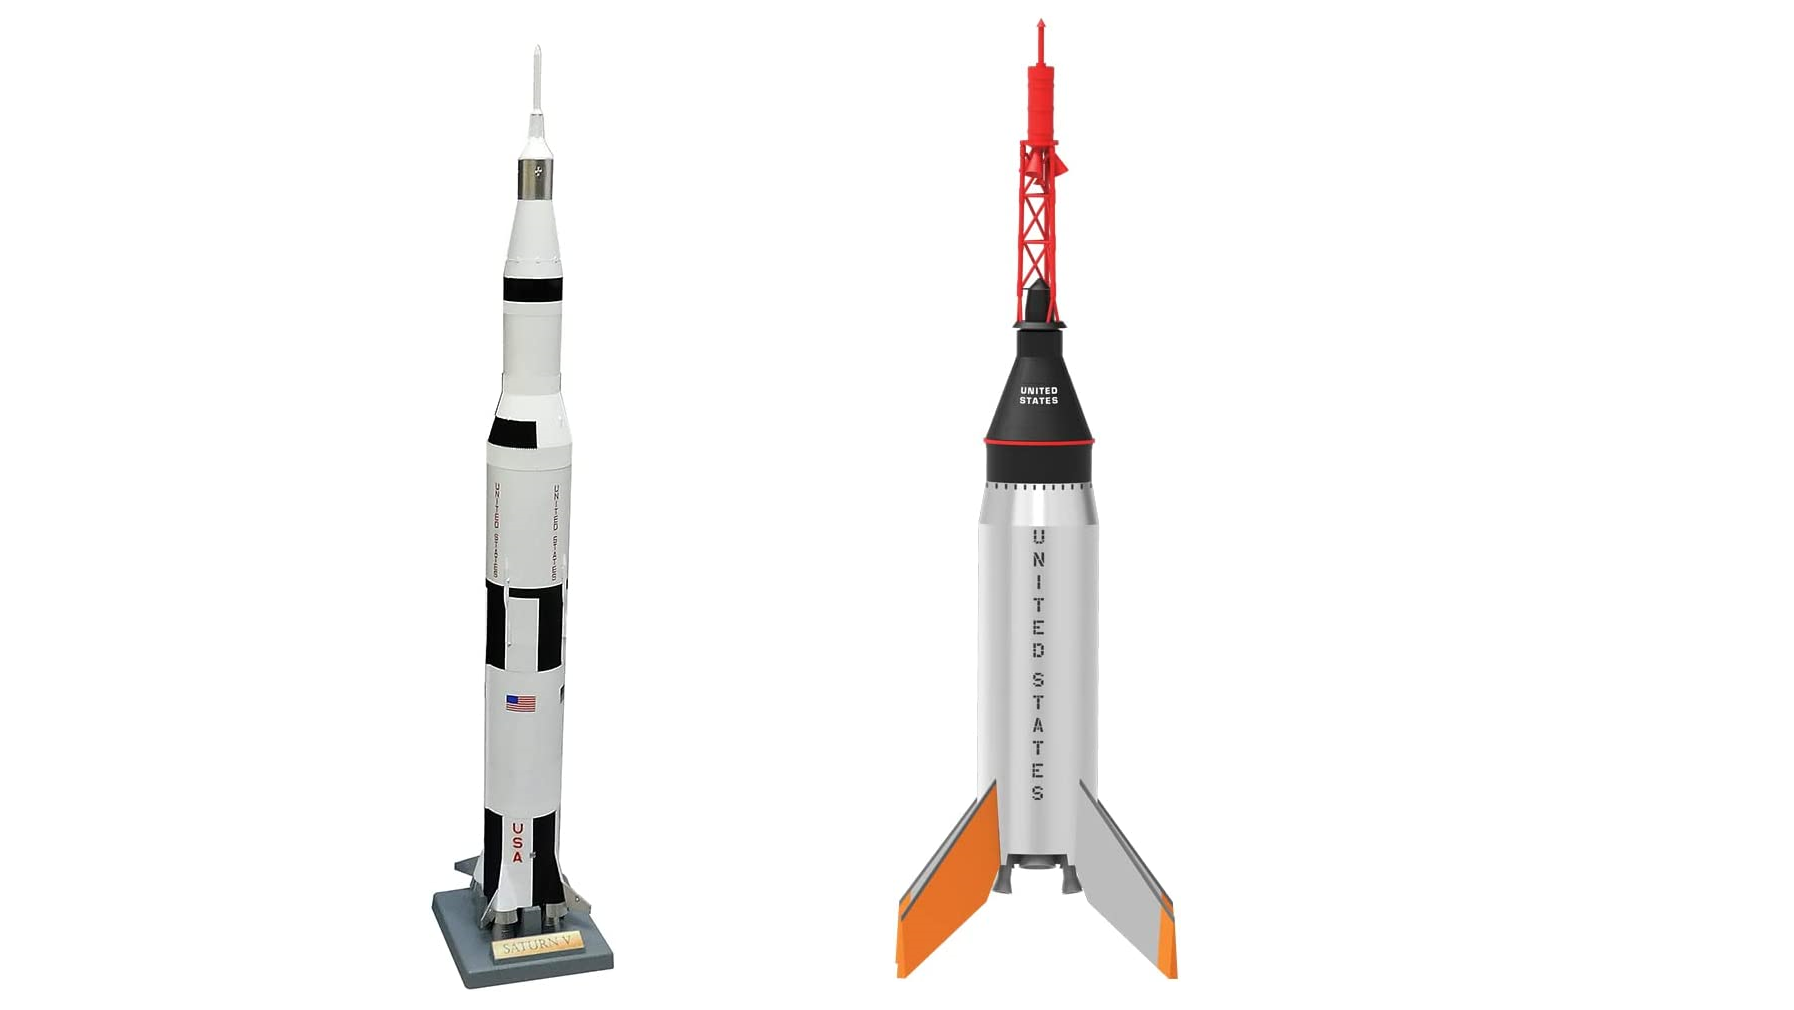 Lift off with Estes model rockets: Up to 32% Cyber Monday savings on Saturn V, Little Joe and more